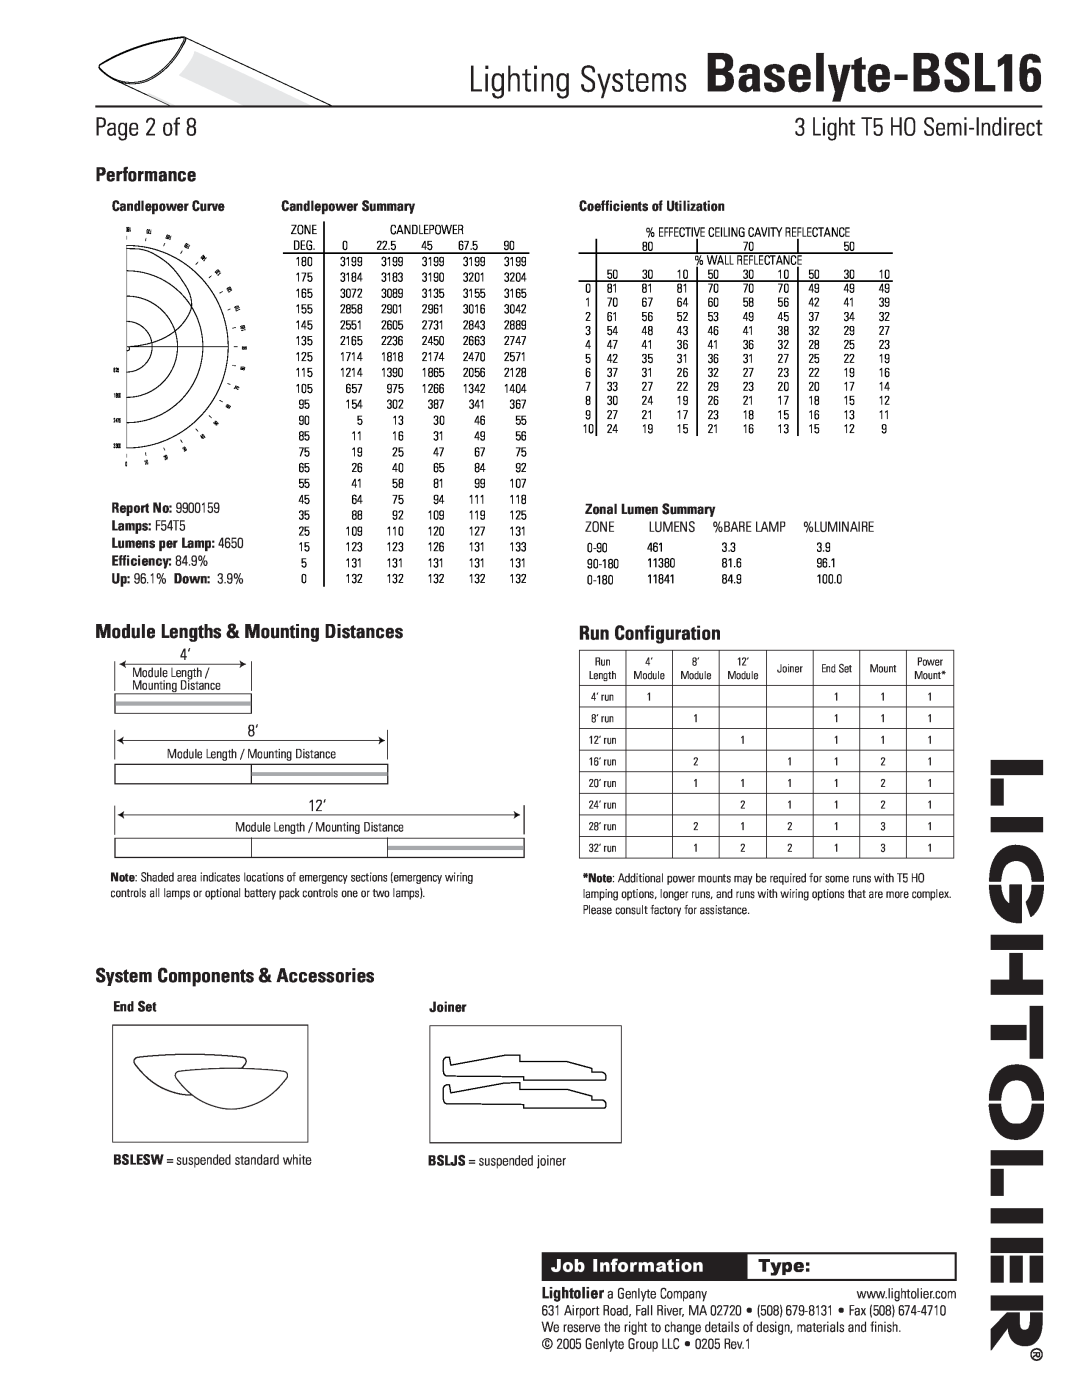 Lightolier Lighting Systems Baselyte-BSL16, Light T5 HO Semi-Indirect, Page, Performance, Run Configuration, Type 